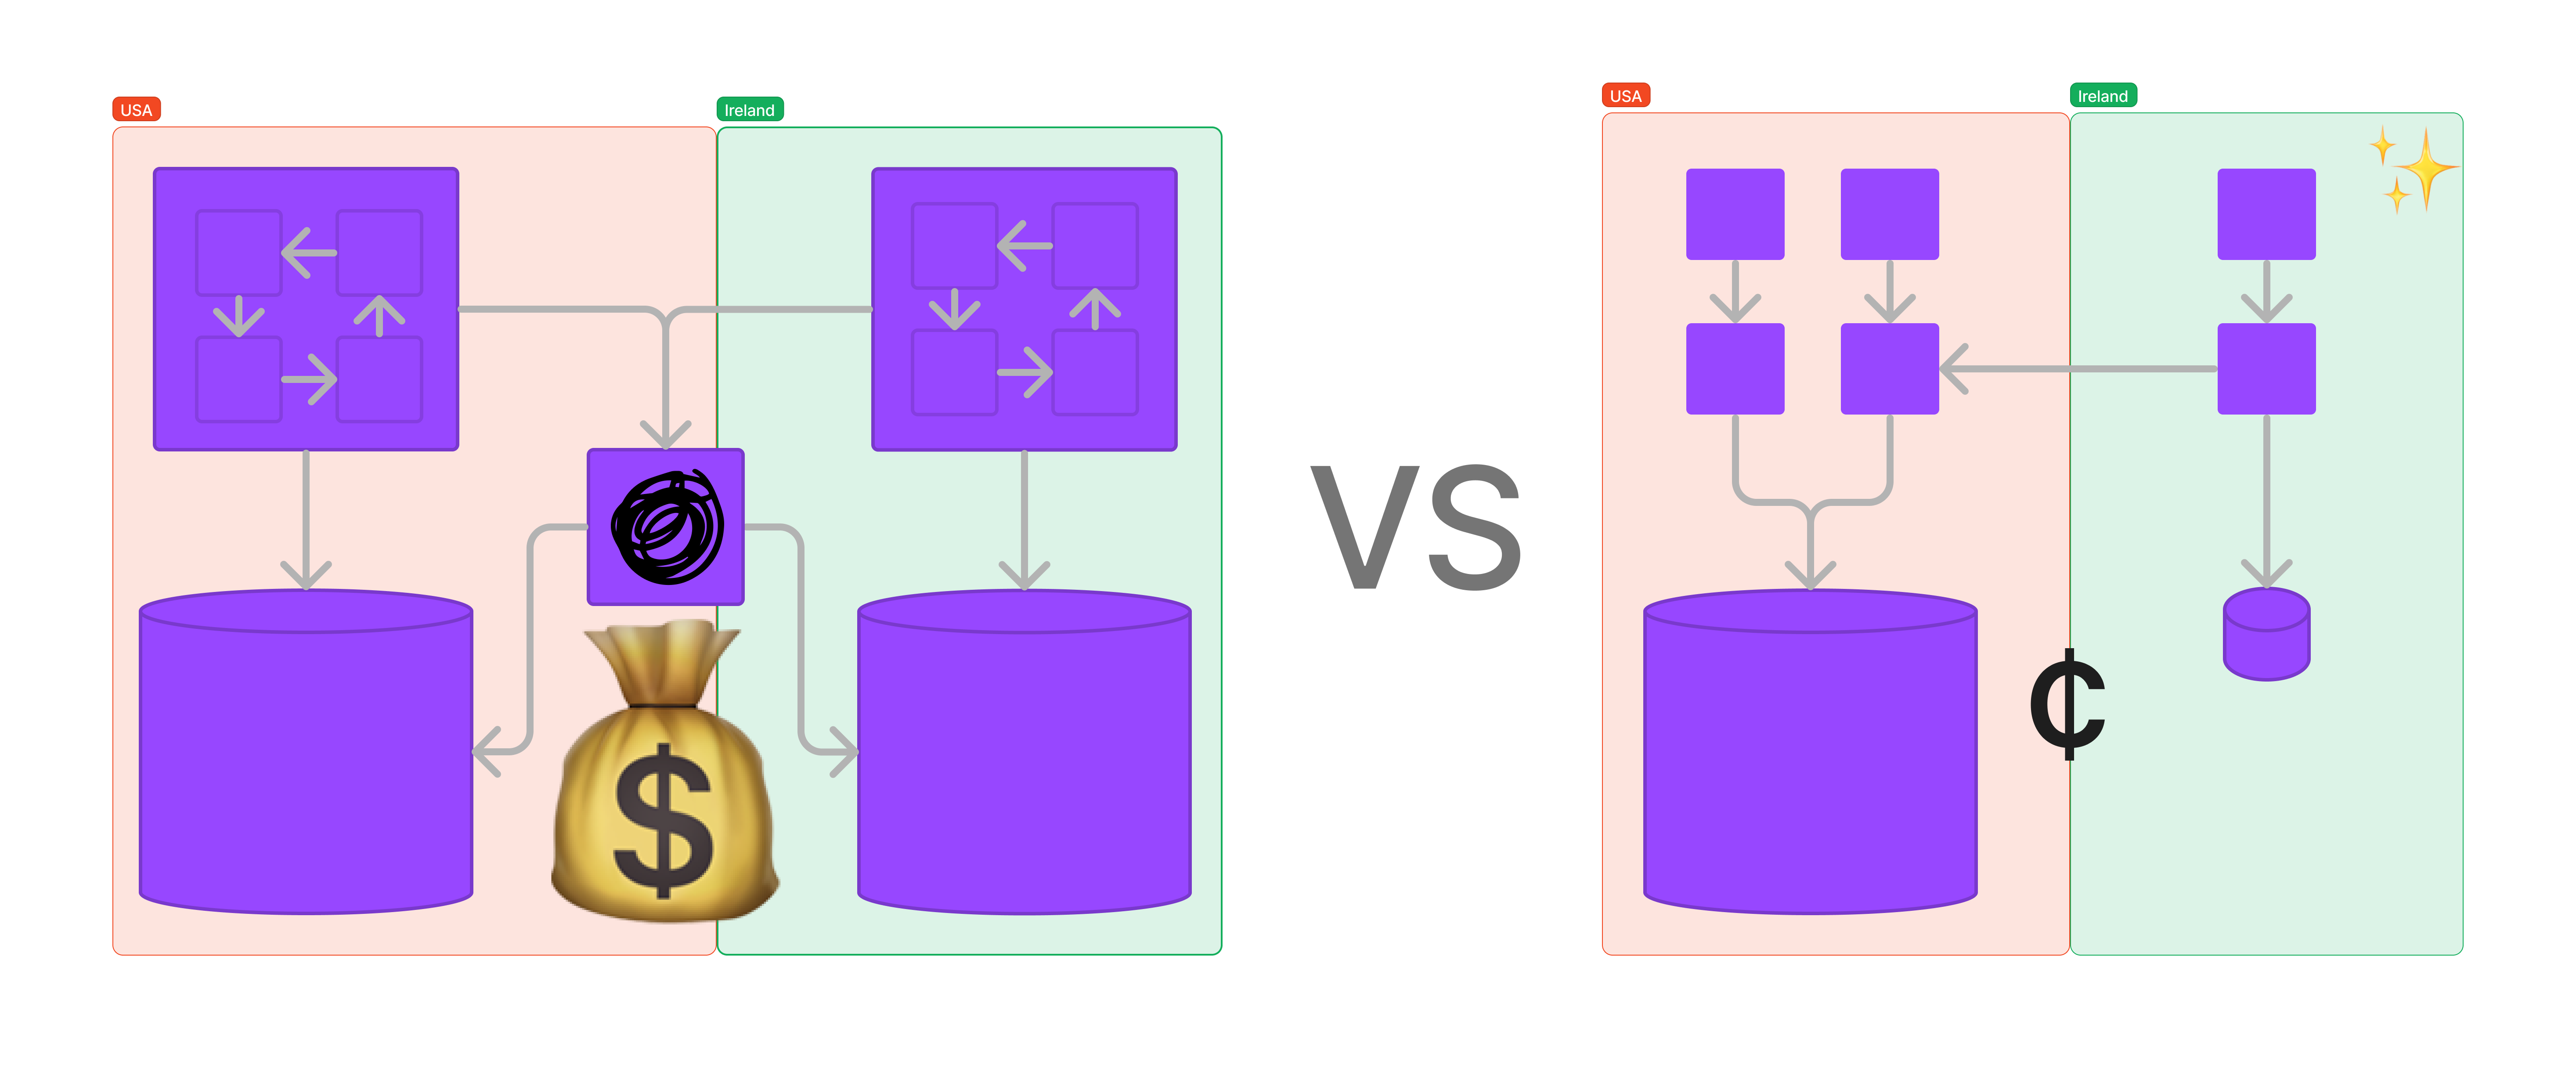 A diagram compares an expensive fully-replicated monolithic system versus a smaller, sharded service-based system